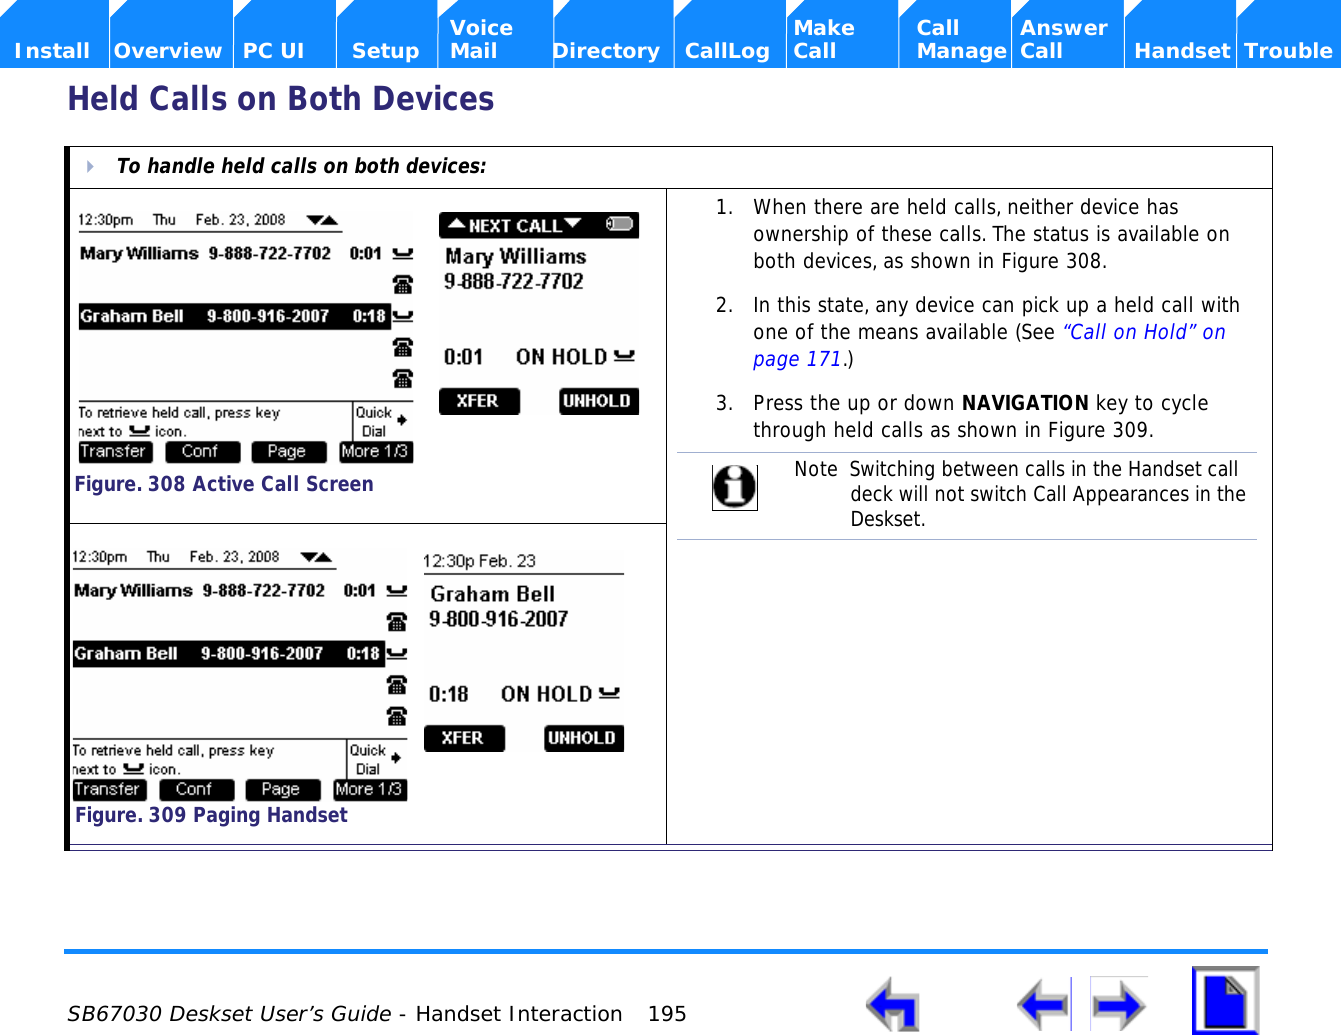  SB67030 Deskset User’s Guide - Handset Interaction 195    Voice Make Call Answer  Install Overview PC UI Setup Mail Directory CallLog Call Manage Call Handset TroubleHeld Calls on Both DevicesTo handle held calls on both devices:1. When there are held calls, neither device has ownership of these calls. The status is available on both devices, as shown in Figure 308.2. In this state, any device can pick up a held call with one of the means available (See “Call on Hold” on page 171.)3. Press the up or down NAVIGATION key to cycle through held calls as shown in Figure 309.Figure. 308 Active Call ScreenNote  Switching between calls in the Handset call deck will not switch Call Appearances in the Deskset.Figure. 309 Paging Handset